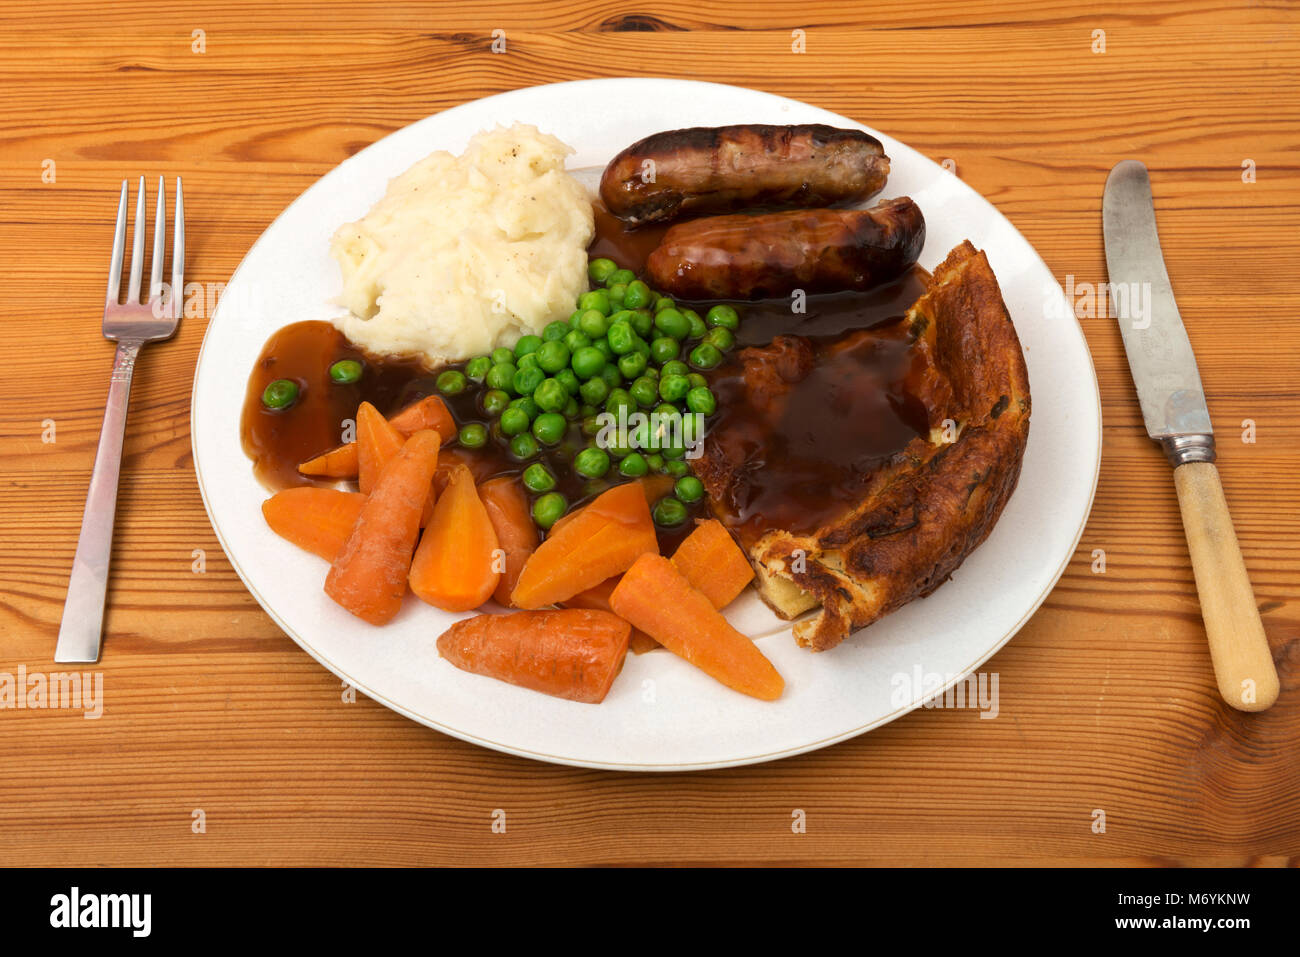 Traditional British dinner of sausages, mashed potato, Yorkshire pudding with carrots and peas. Stock Photo